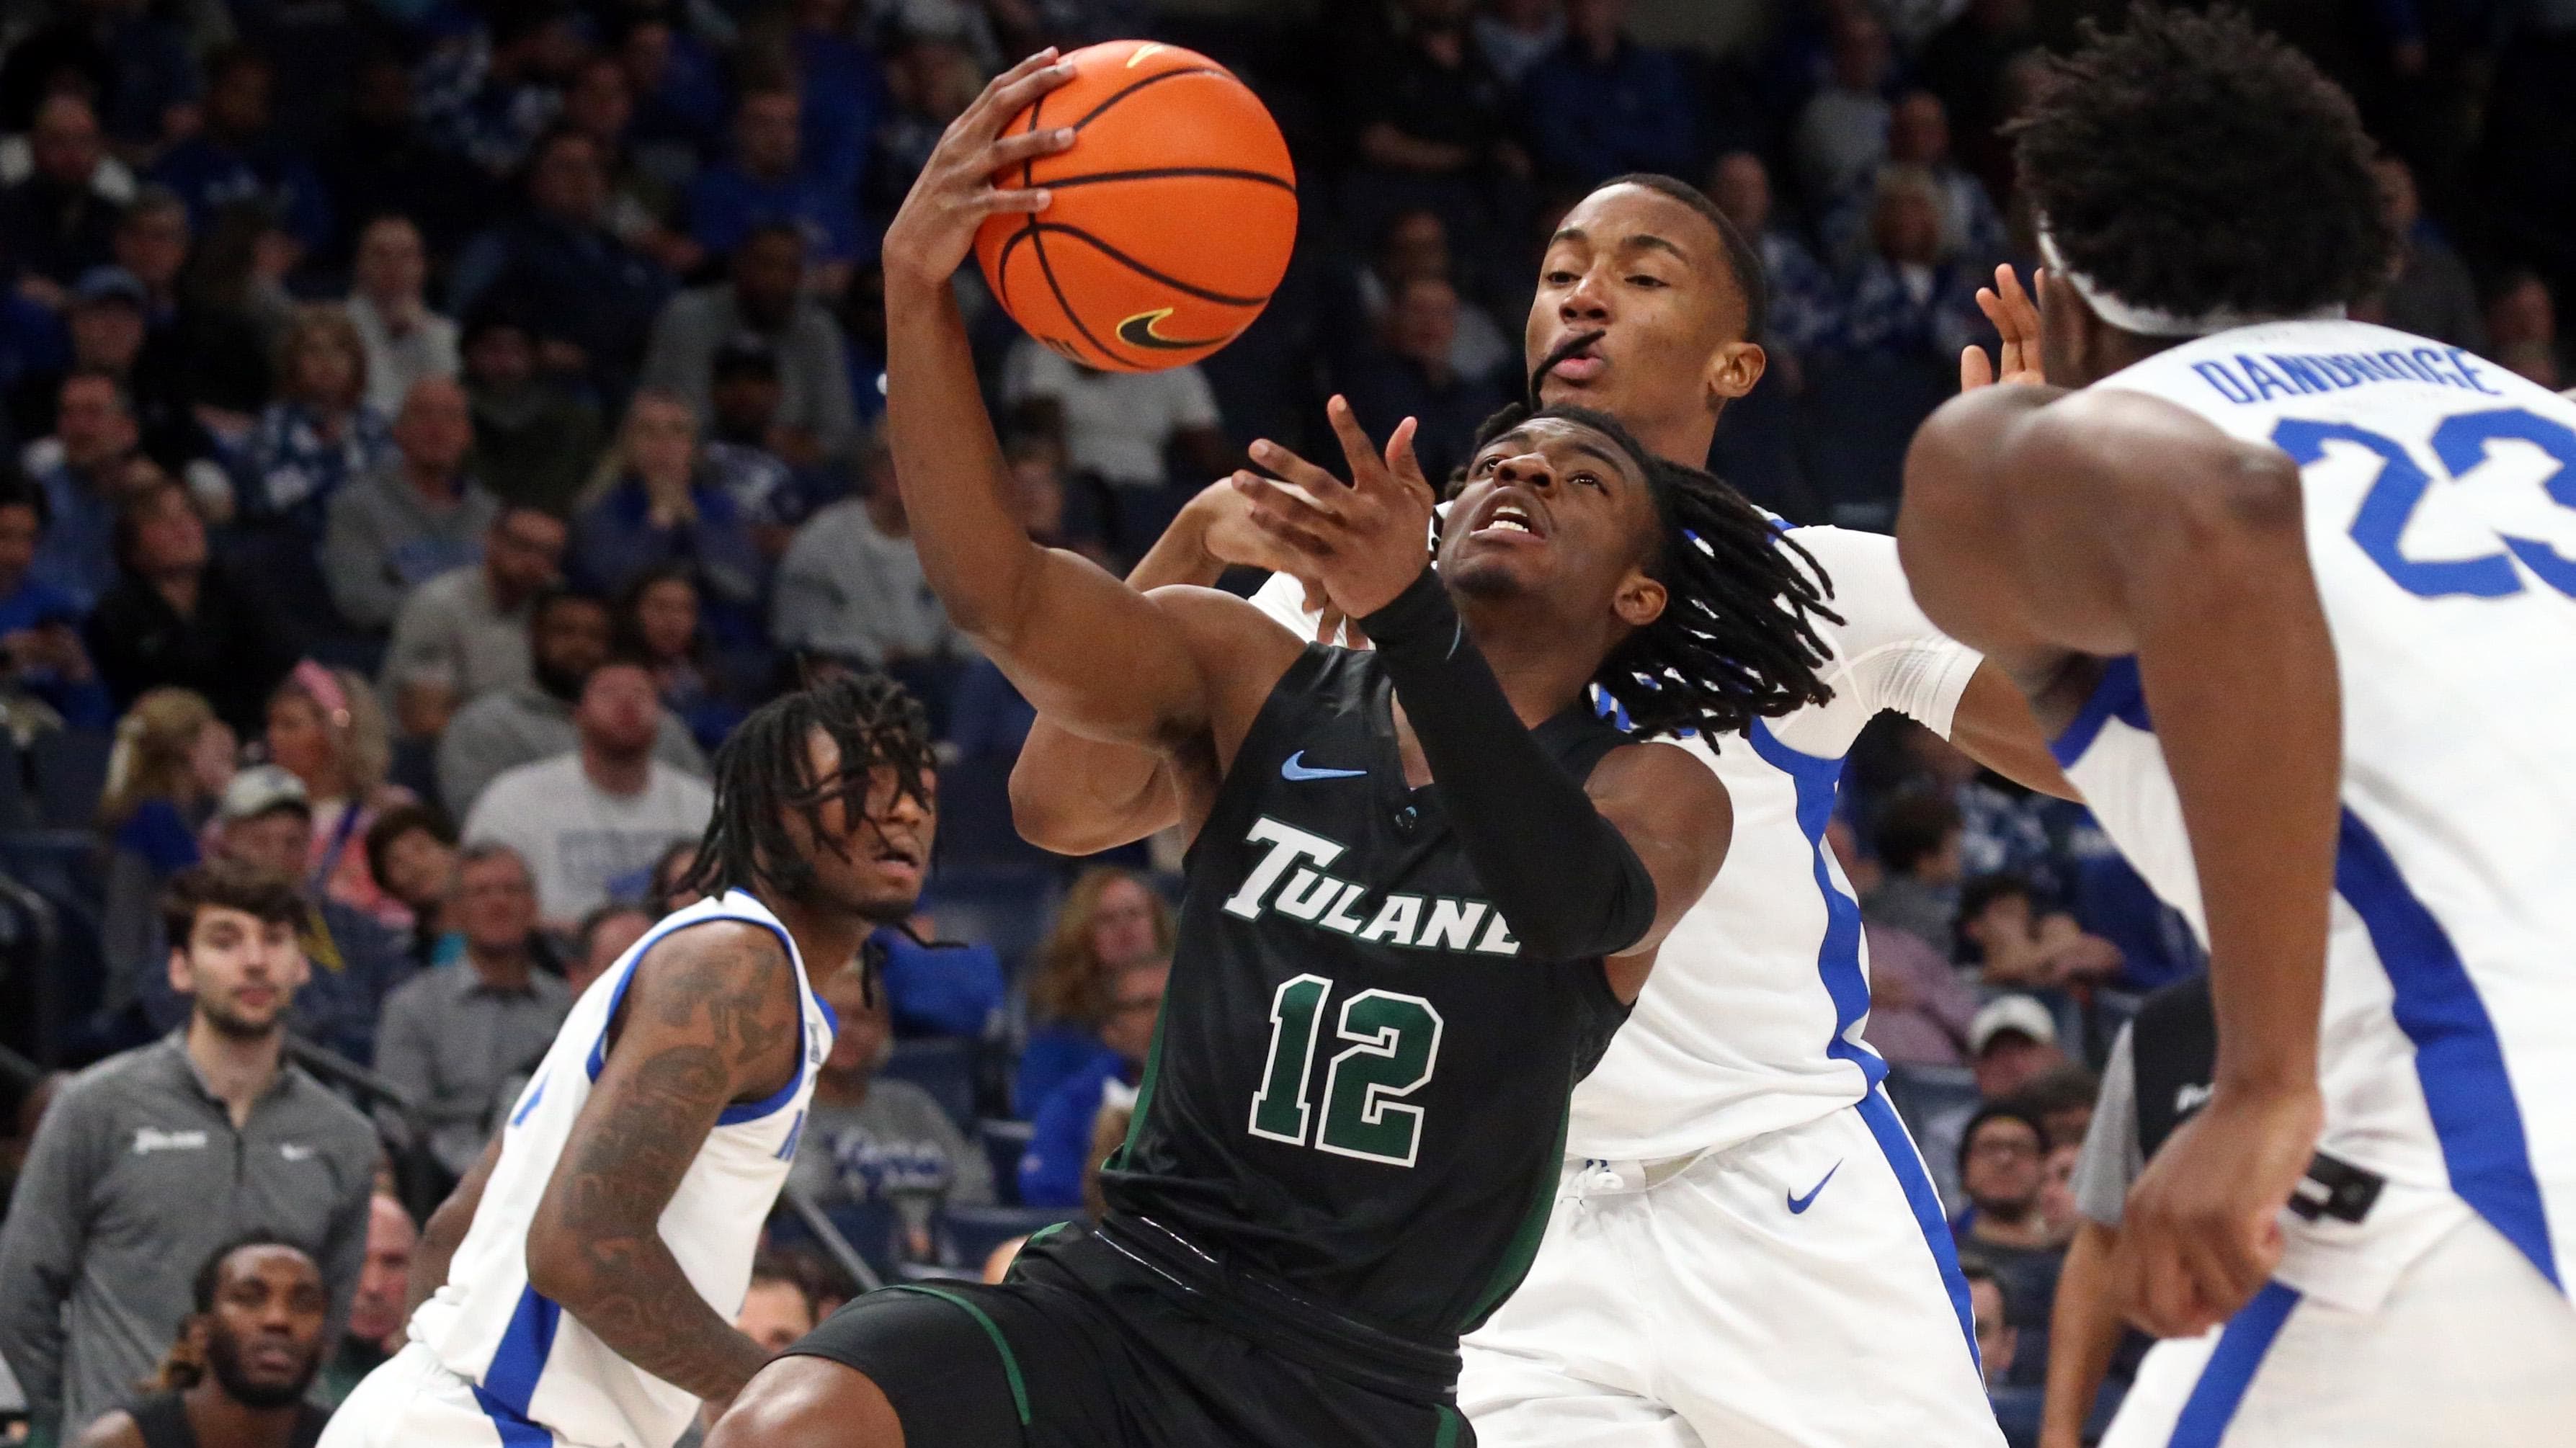 Oklahoma State Eyes Tulane Transfer Guard Kolby King for Fast-Paced System and Building via Transfer Portal